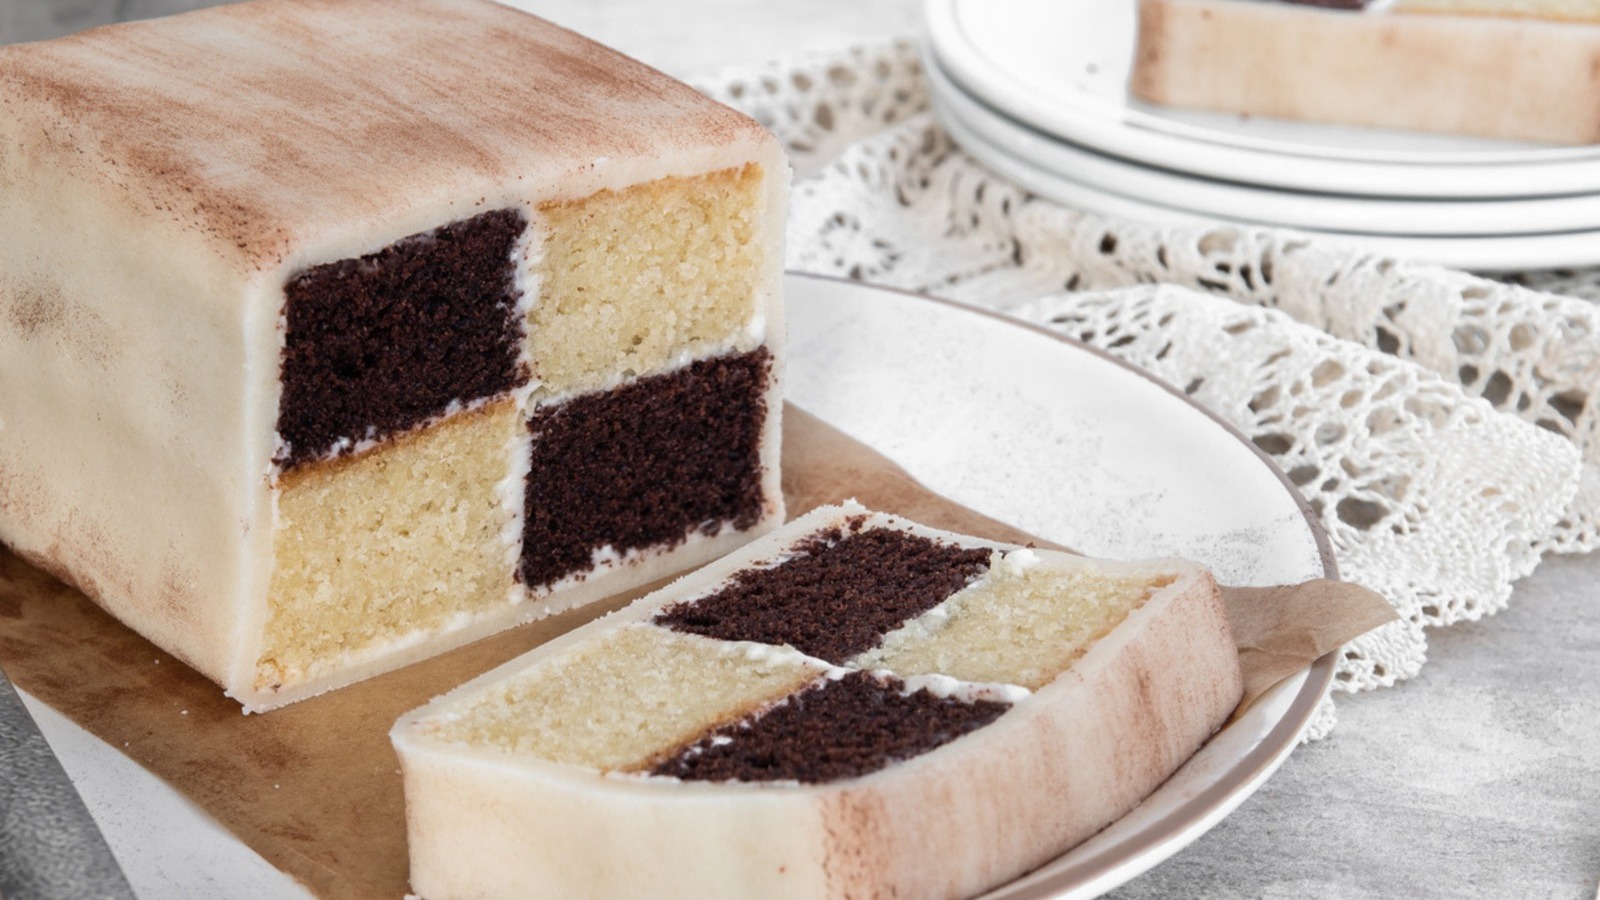 https://www.mashed.com/img/gallery/the-chocolate-battenberg-cake-you-didnt-know-you-needed/l-intro-1618847752.jpg